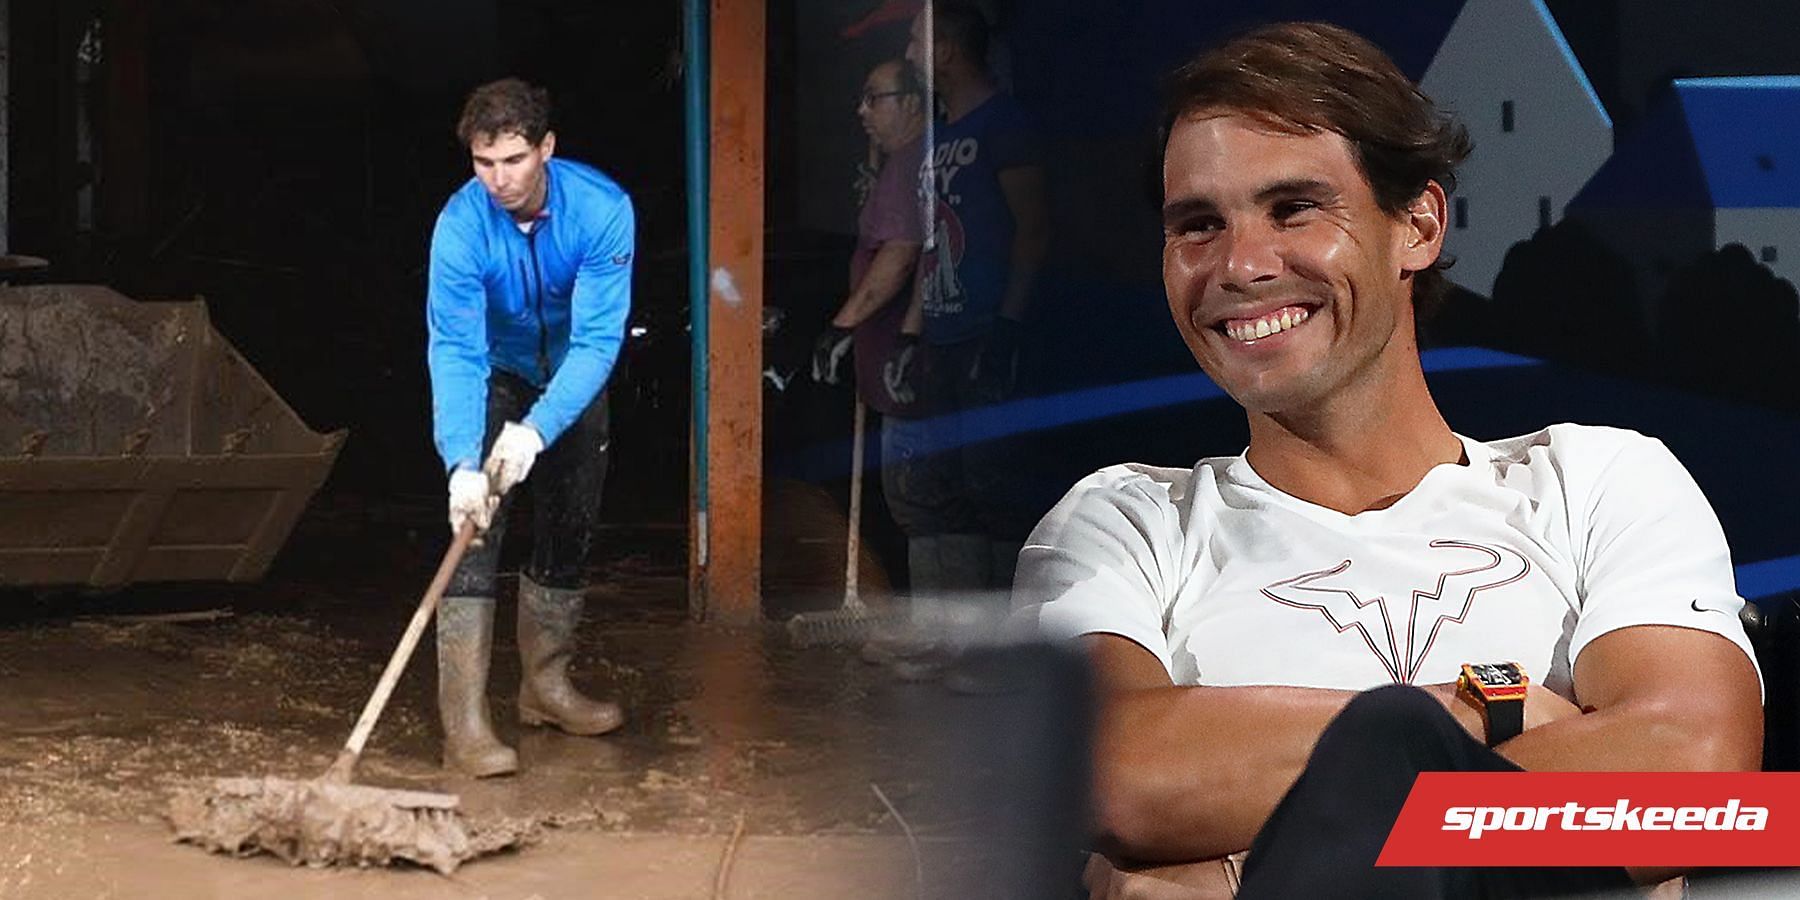 Rafael Nadal is a class act on and off the court